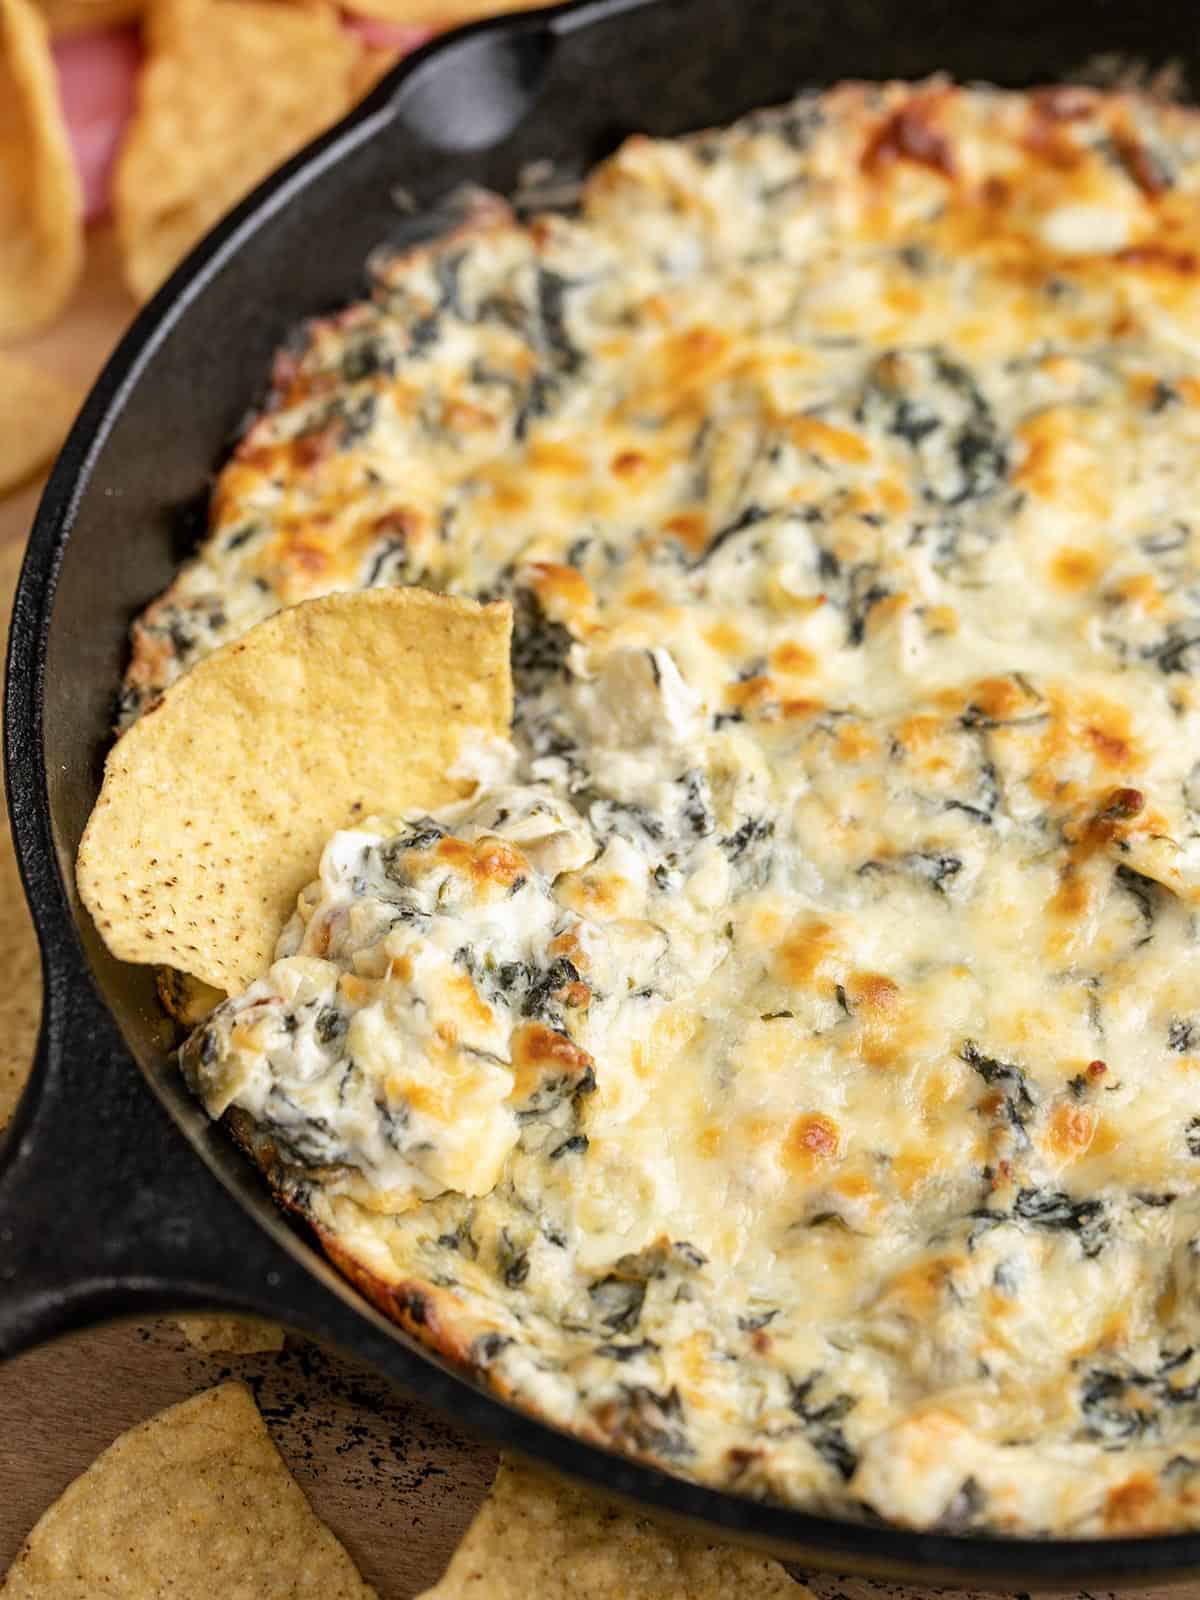 Close up side view of a skillet full of spinach artichoke dip with a tortilla chip.